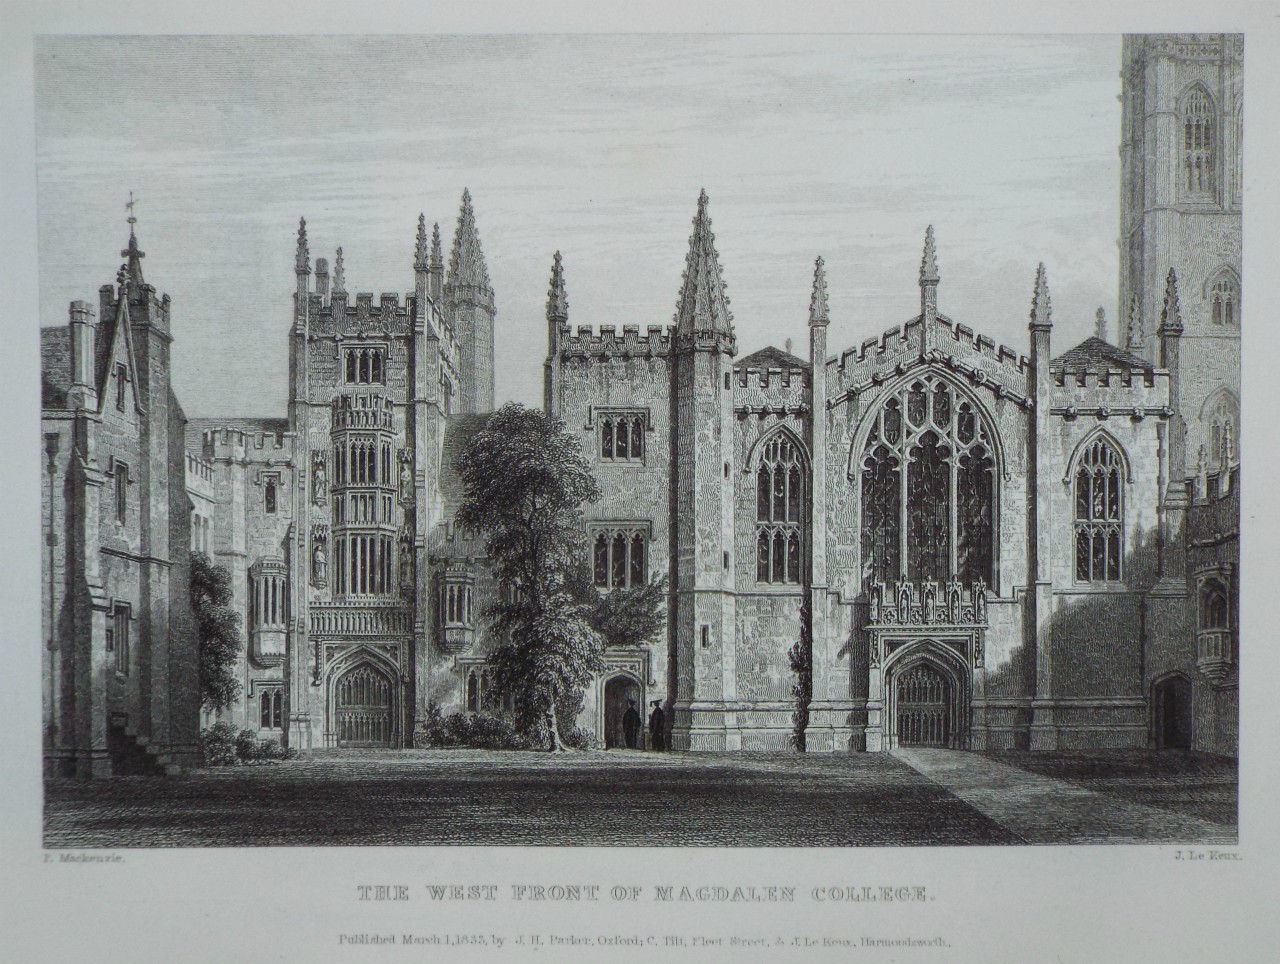 Print - The West Front of Magdalen College. - Le